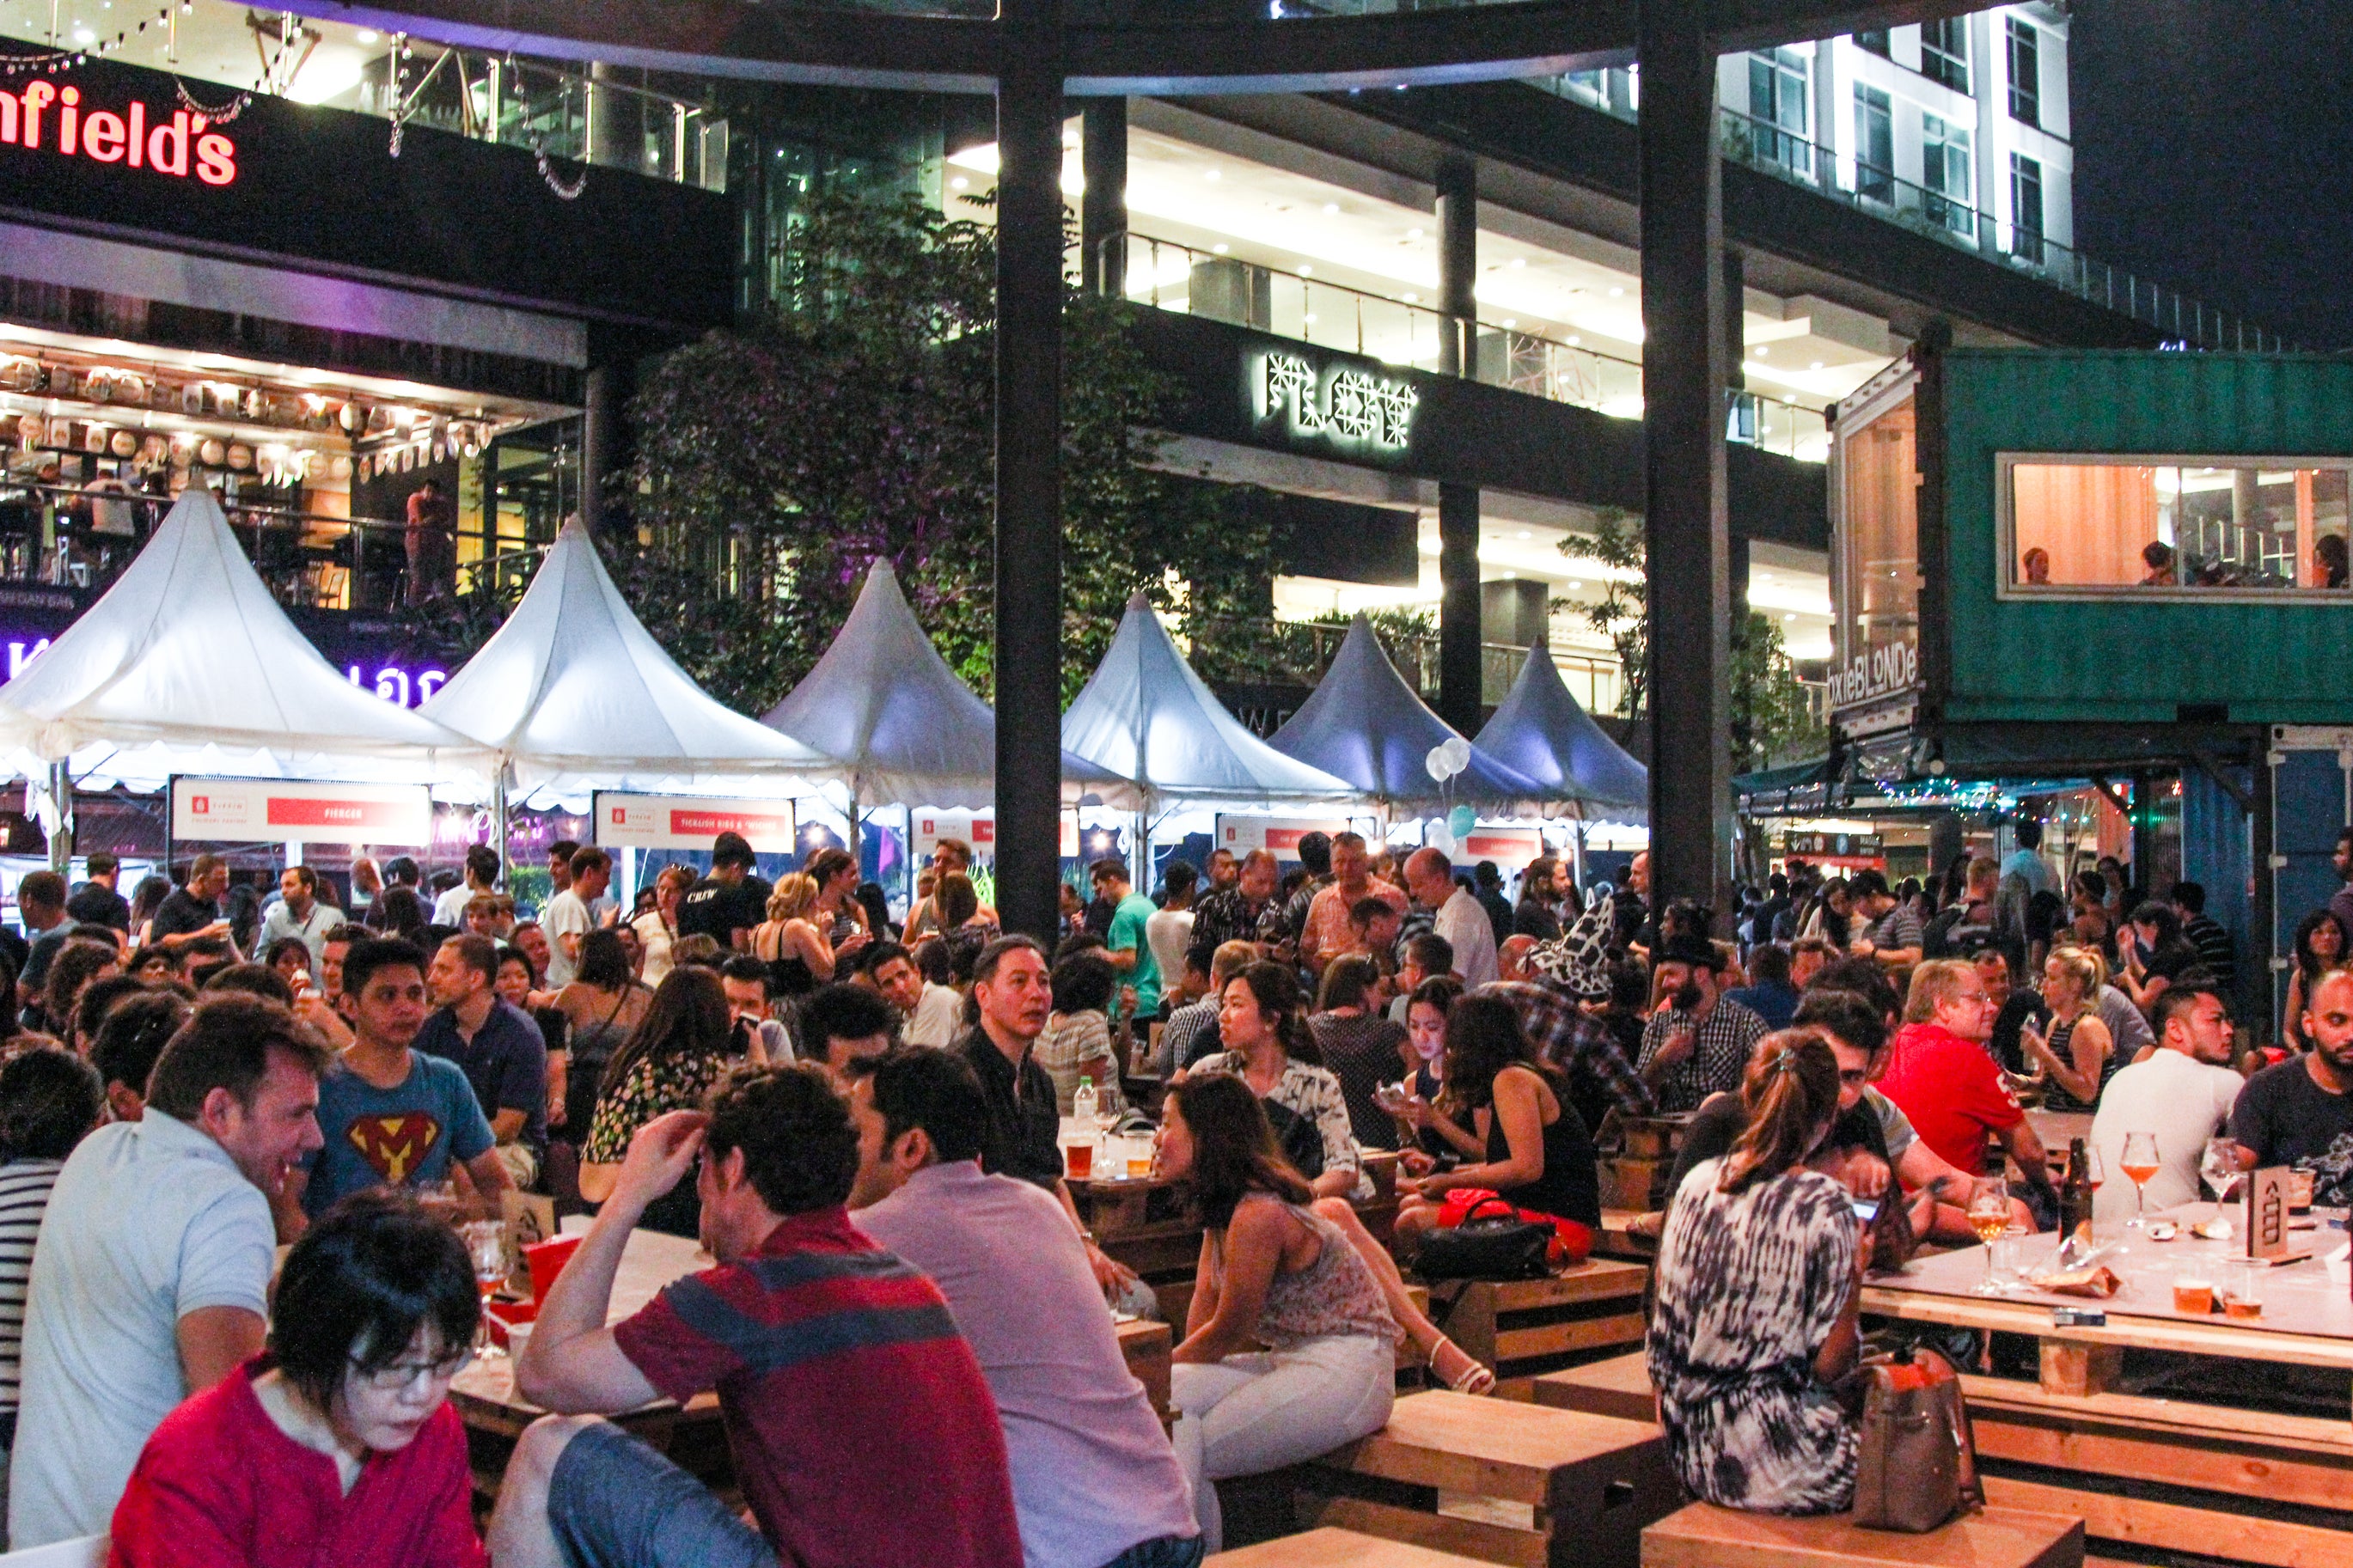 DBKL Rejects Application to Hold Better Beer Festival in Publika - WORLD OF BUZZ 2